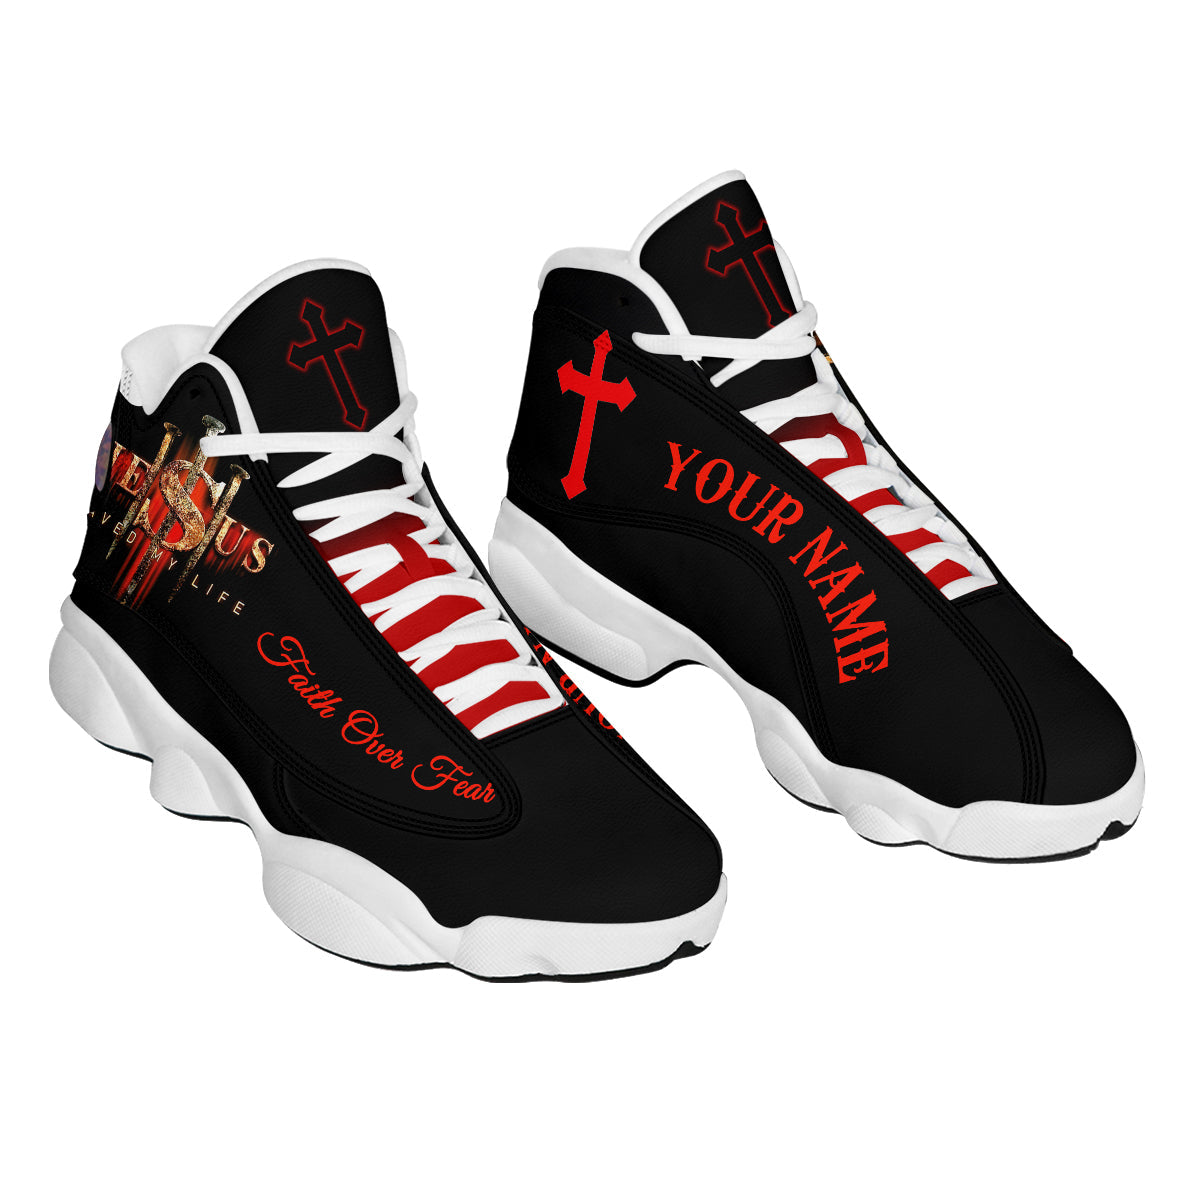 Jesus Saved My Life Personalized Jesus Basketball Shoes For Men Women - Christian Shoes - Jesus Shoes - Unisex Basketball Shoes